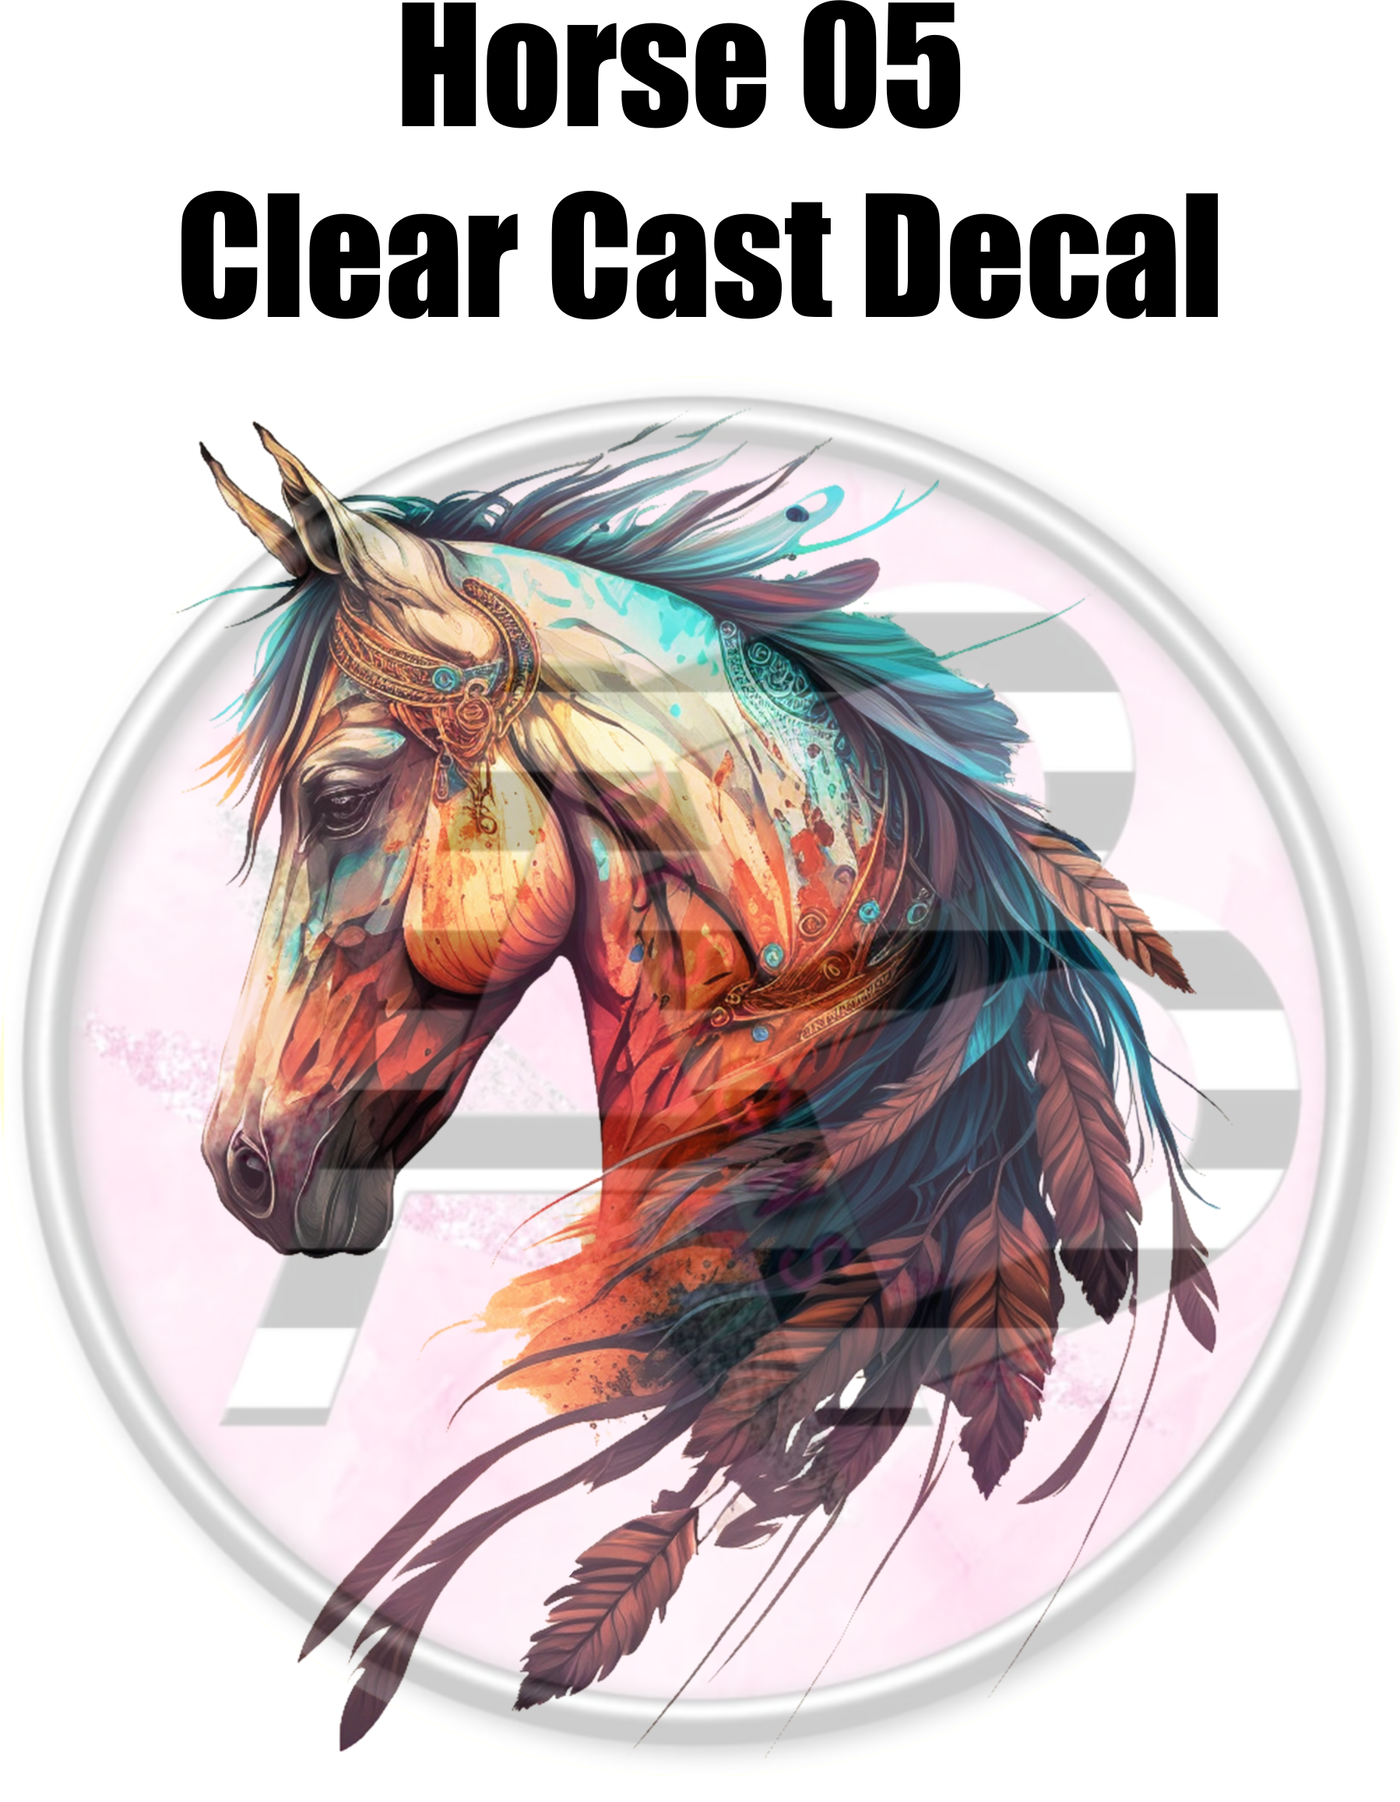 Horse 05 - Clear Cast Decal